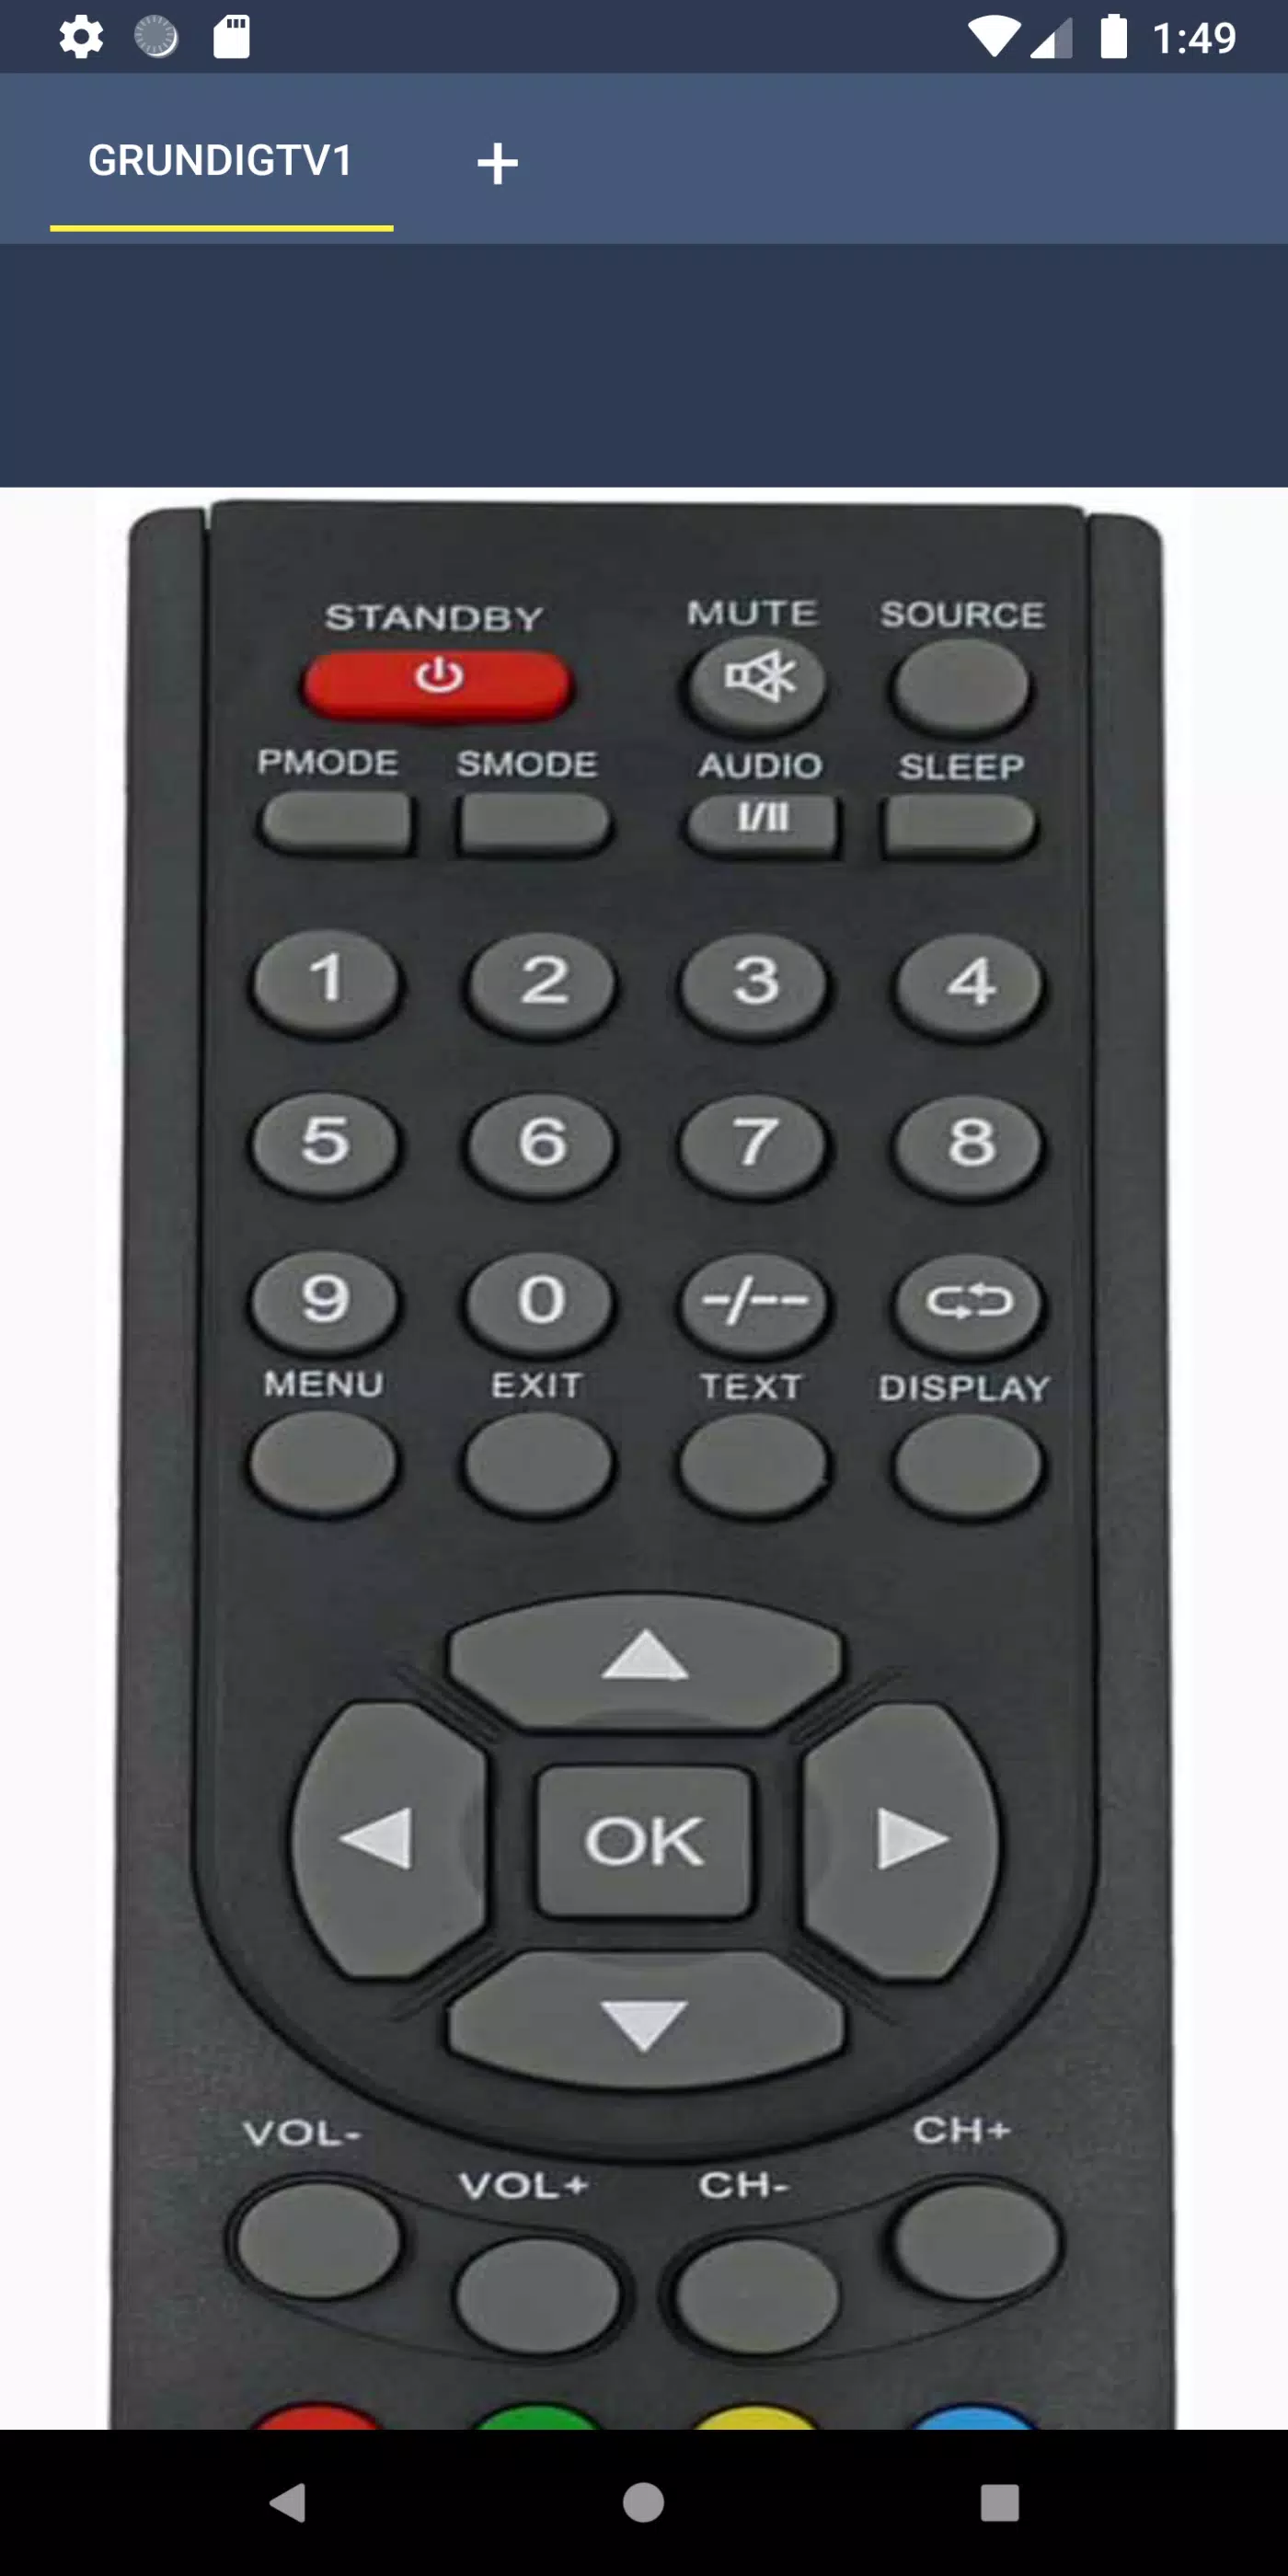 Grundig TV Remote Control for Android - APK Download